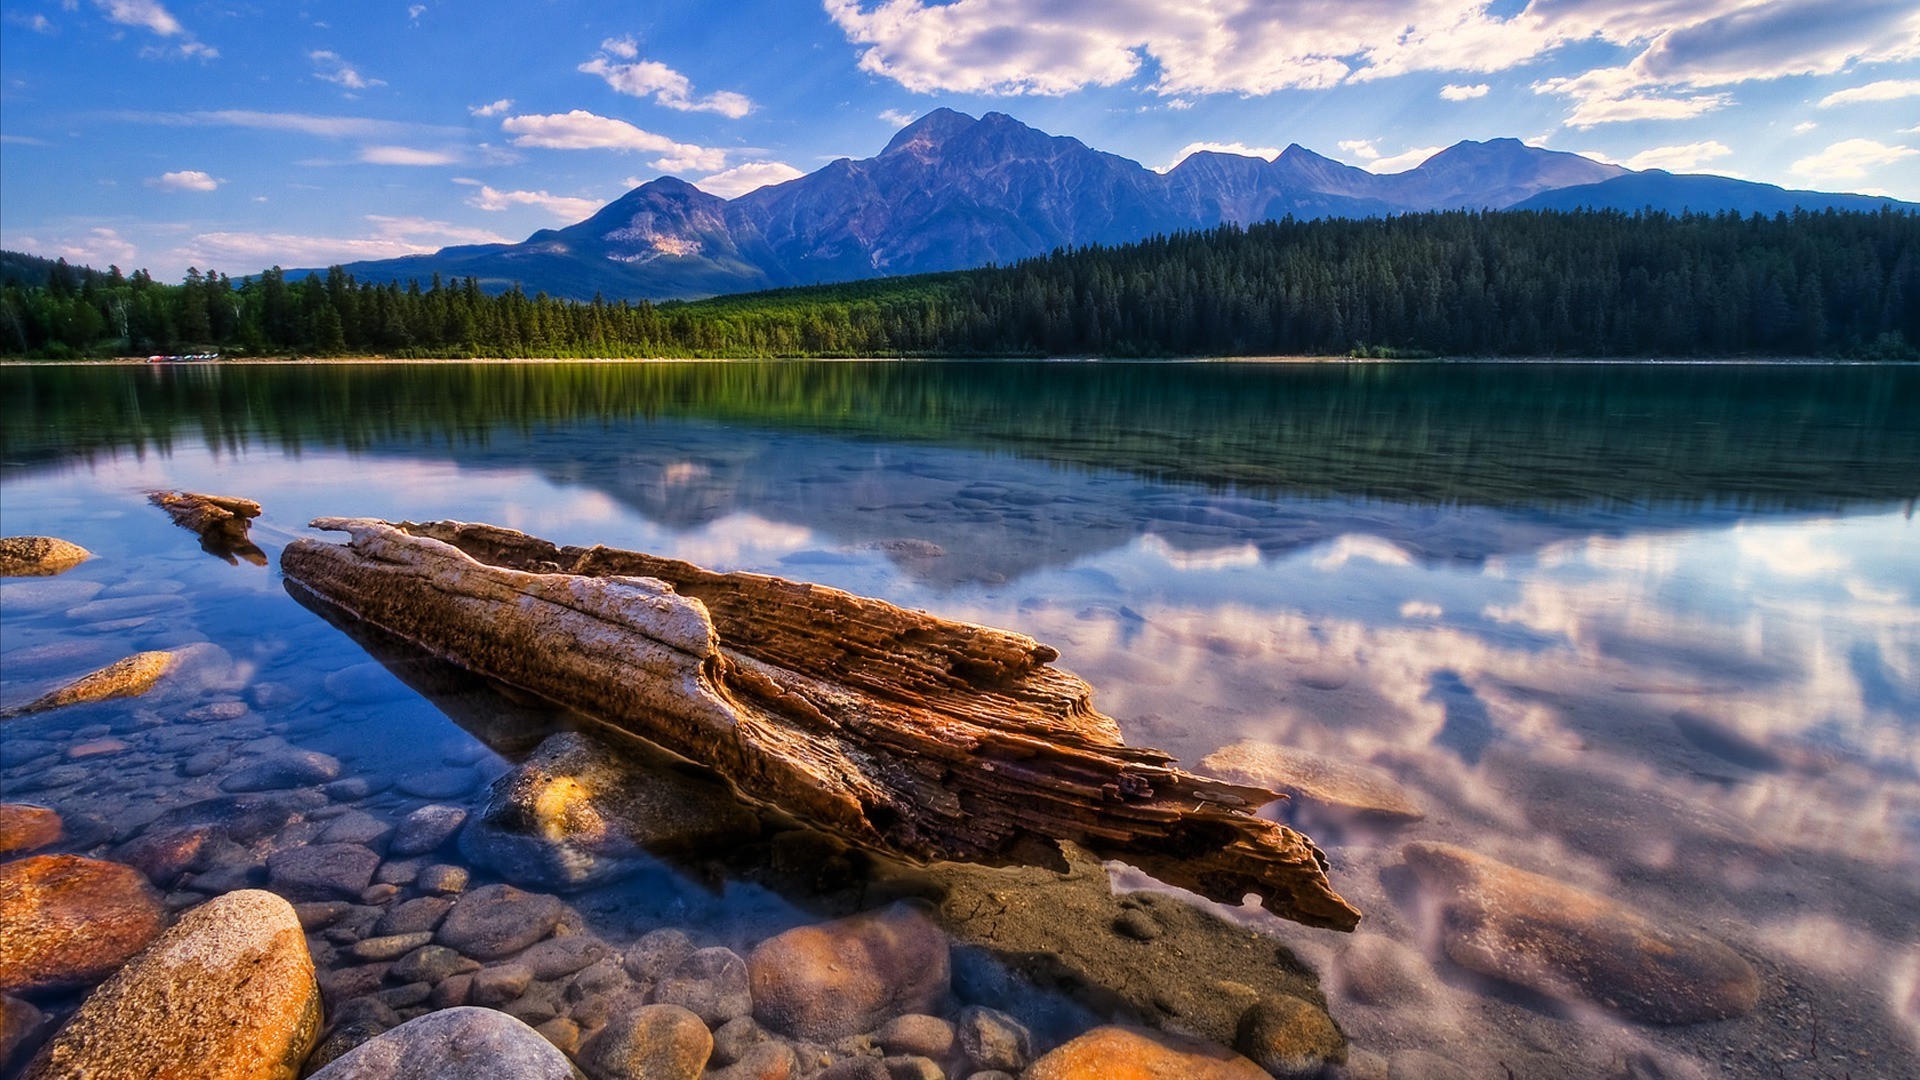 Relaxing HD Wallpaper Lake Calm Transparent Water Dry Wood Stone Pine Forest, Mountains, Sky, Wallpaper13.com